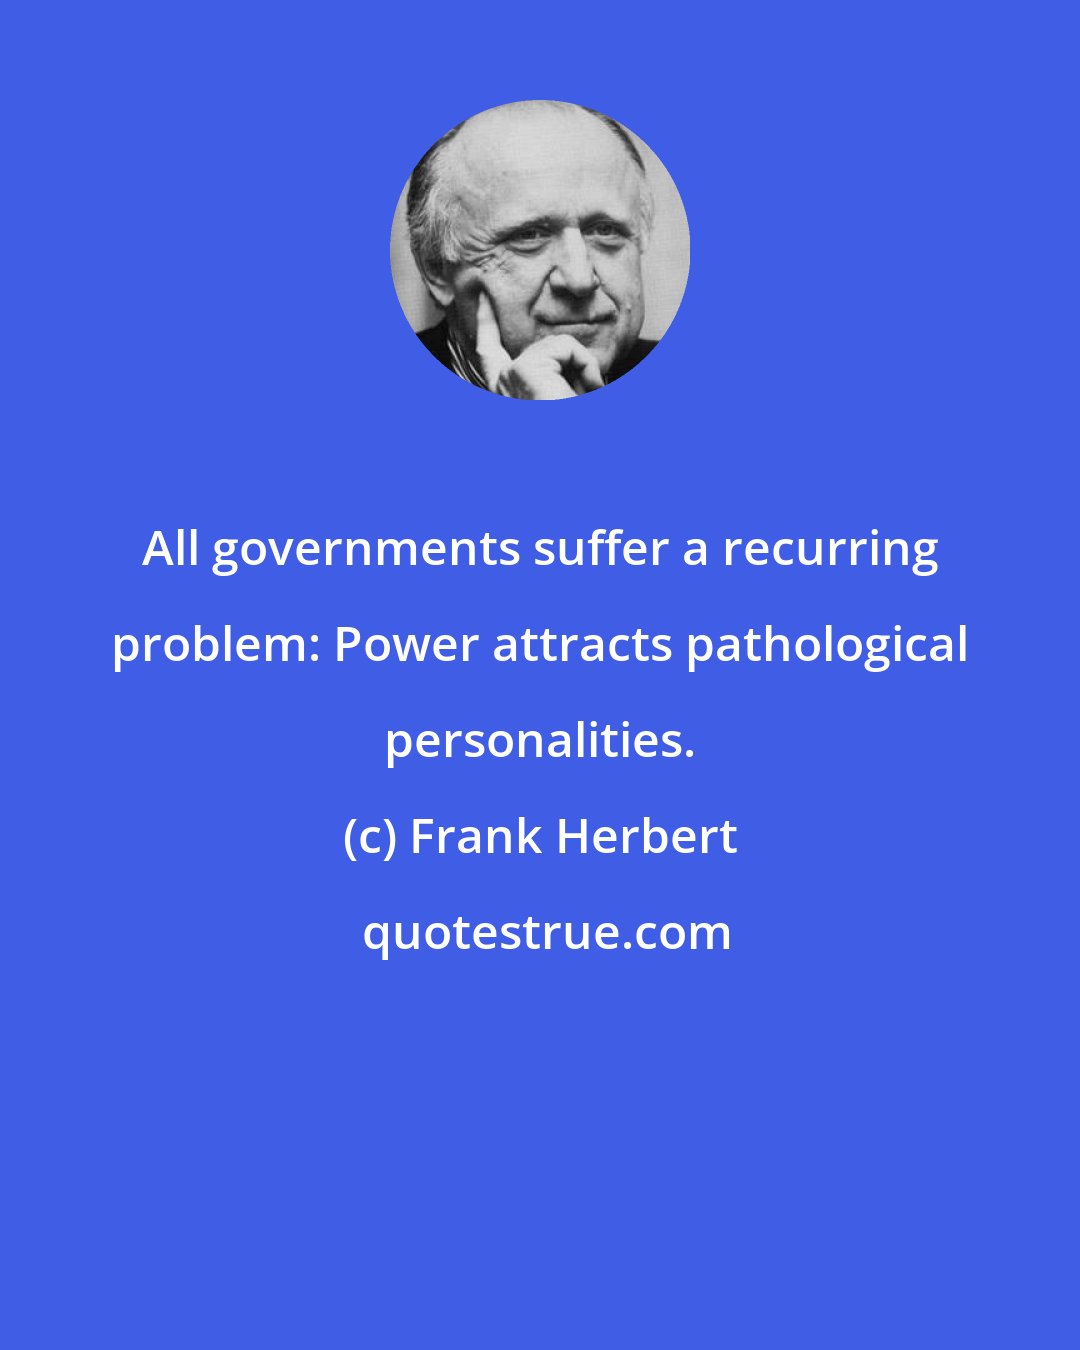 Frank Herbert: All governments suffer a recurring problem: Power attracts pathological personalities.